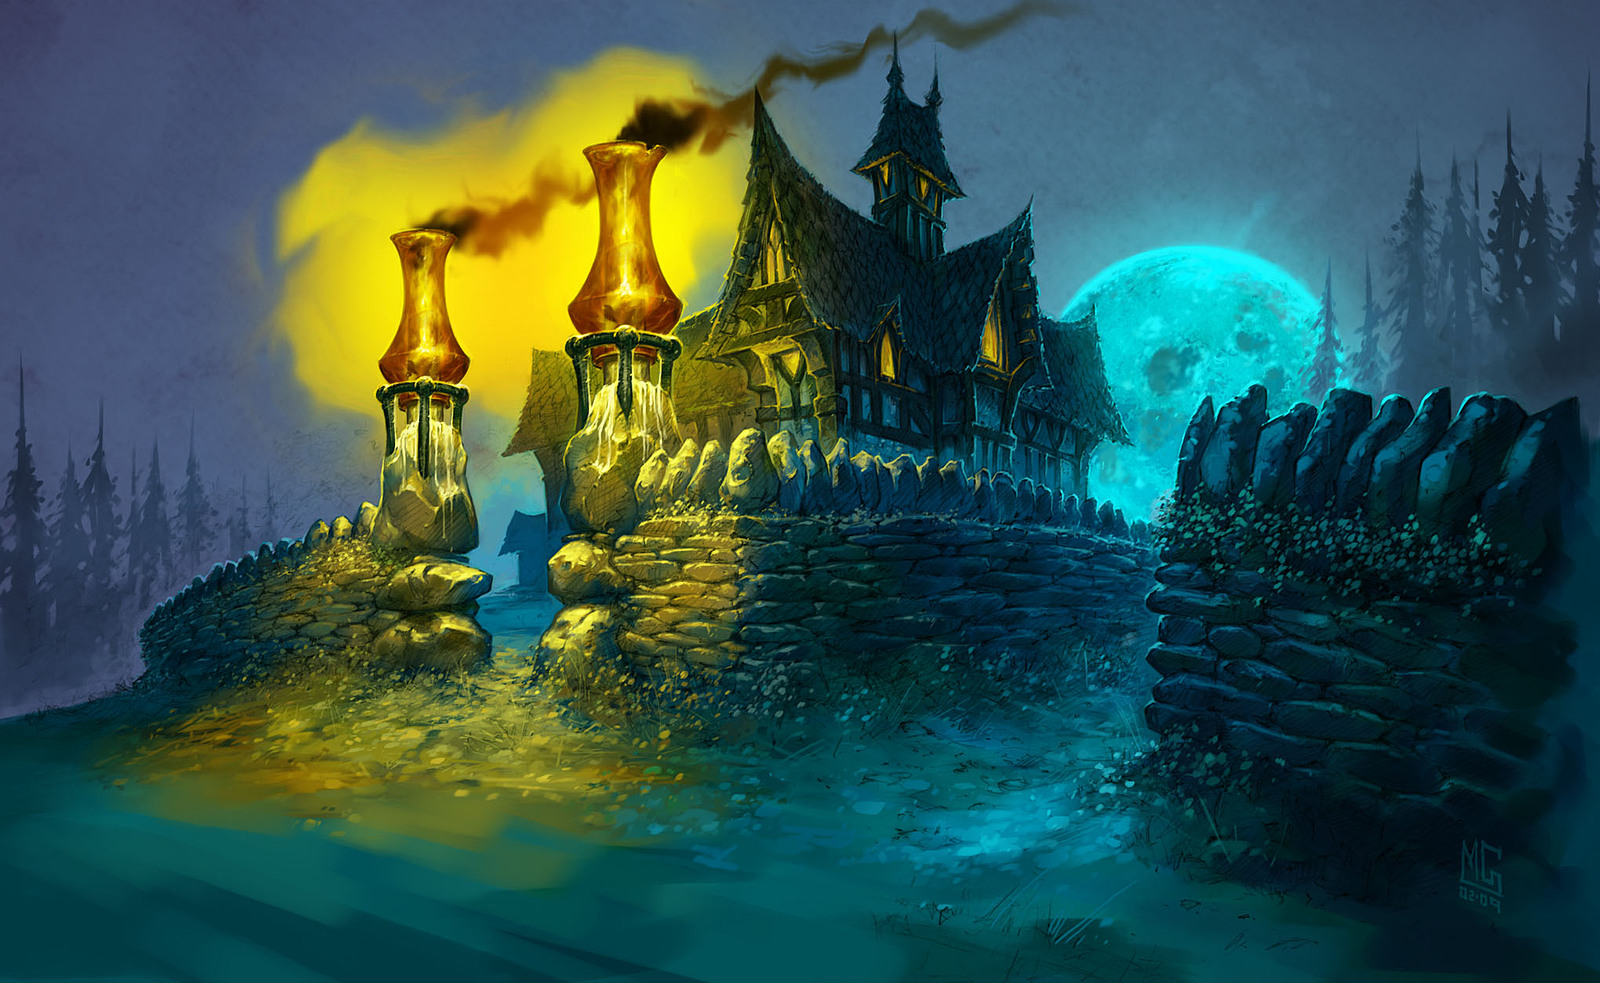 Video Game World Of Warcraft: Cataclysm HD Wallpaper | Background Image